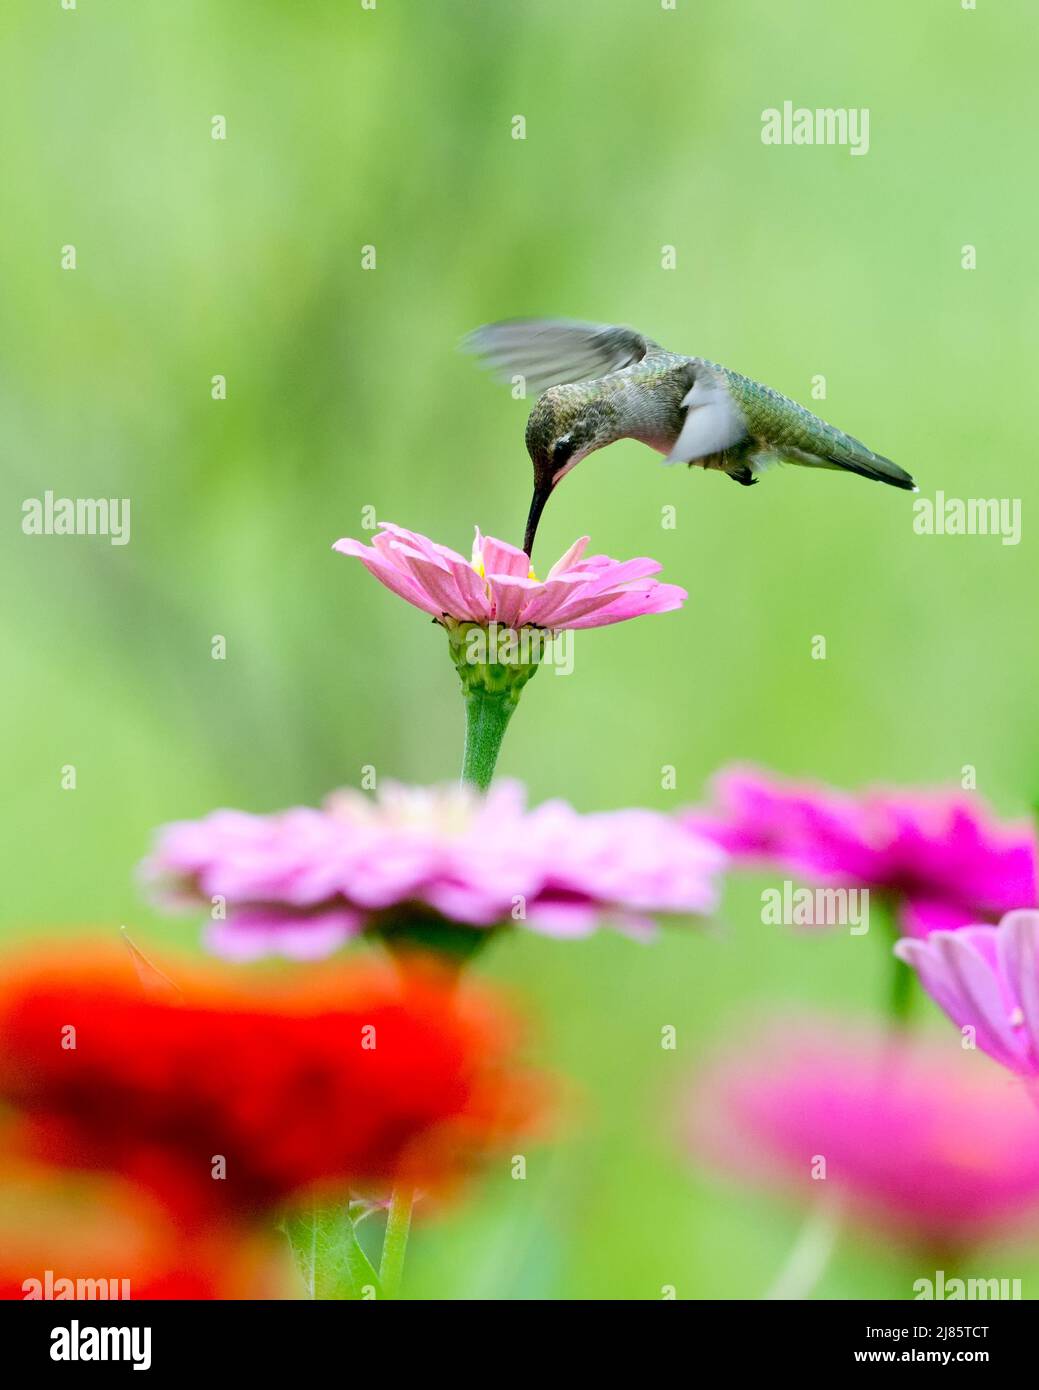 Hummingbird over a pink zinnia with orange flower in the foreground. Stock Photo